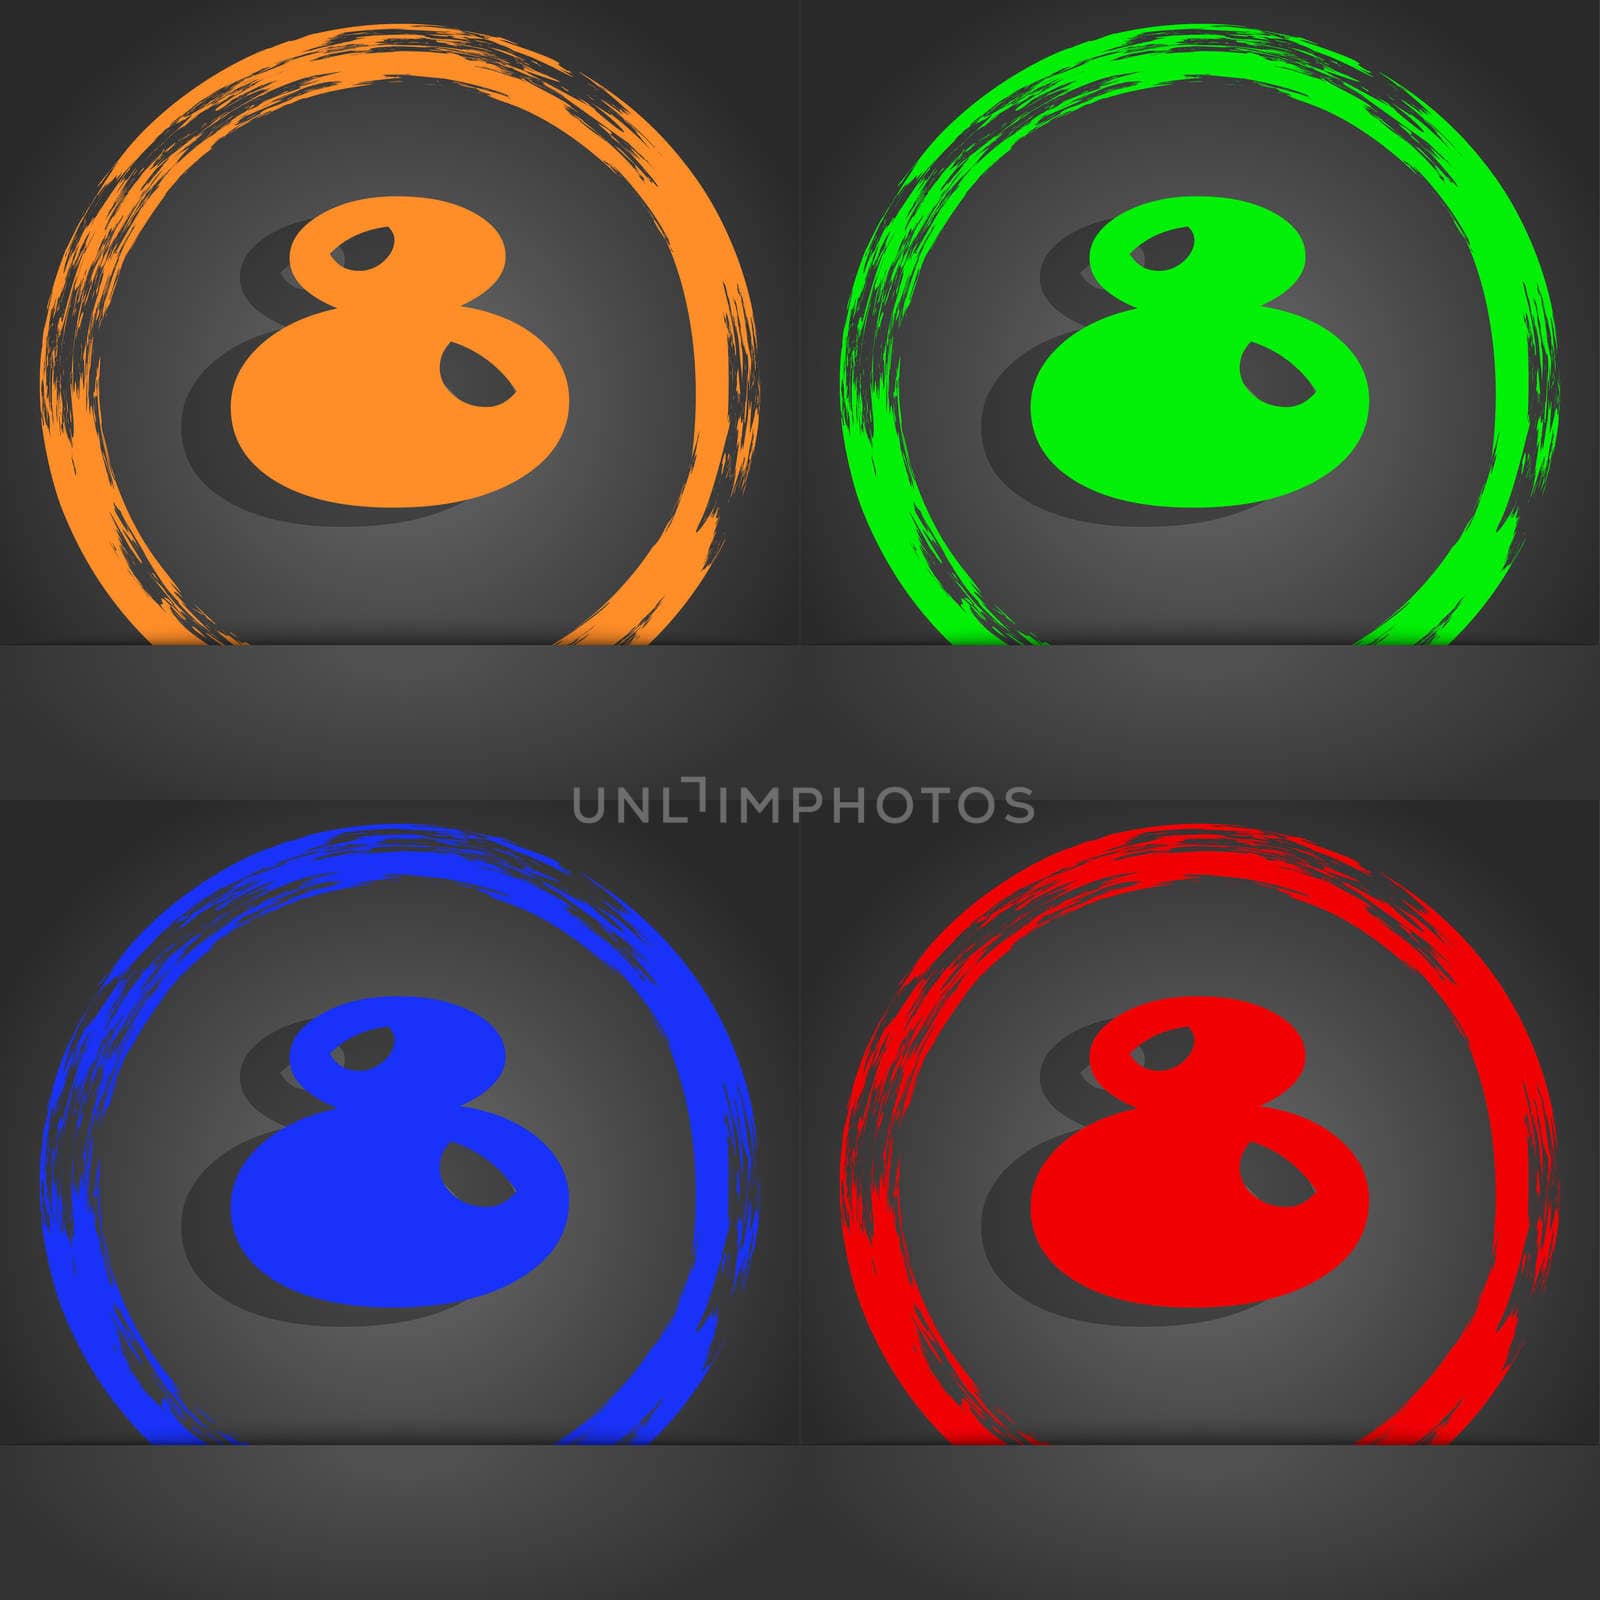 number Eight icon sign. Fashionable modern style. In the orange, green, blue, red design. illustration